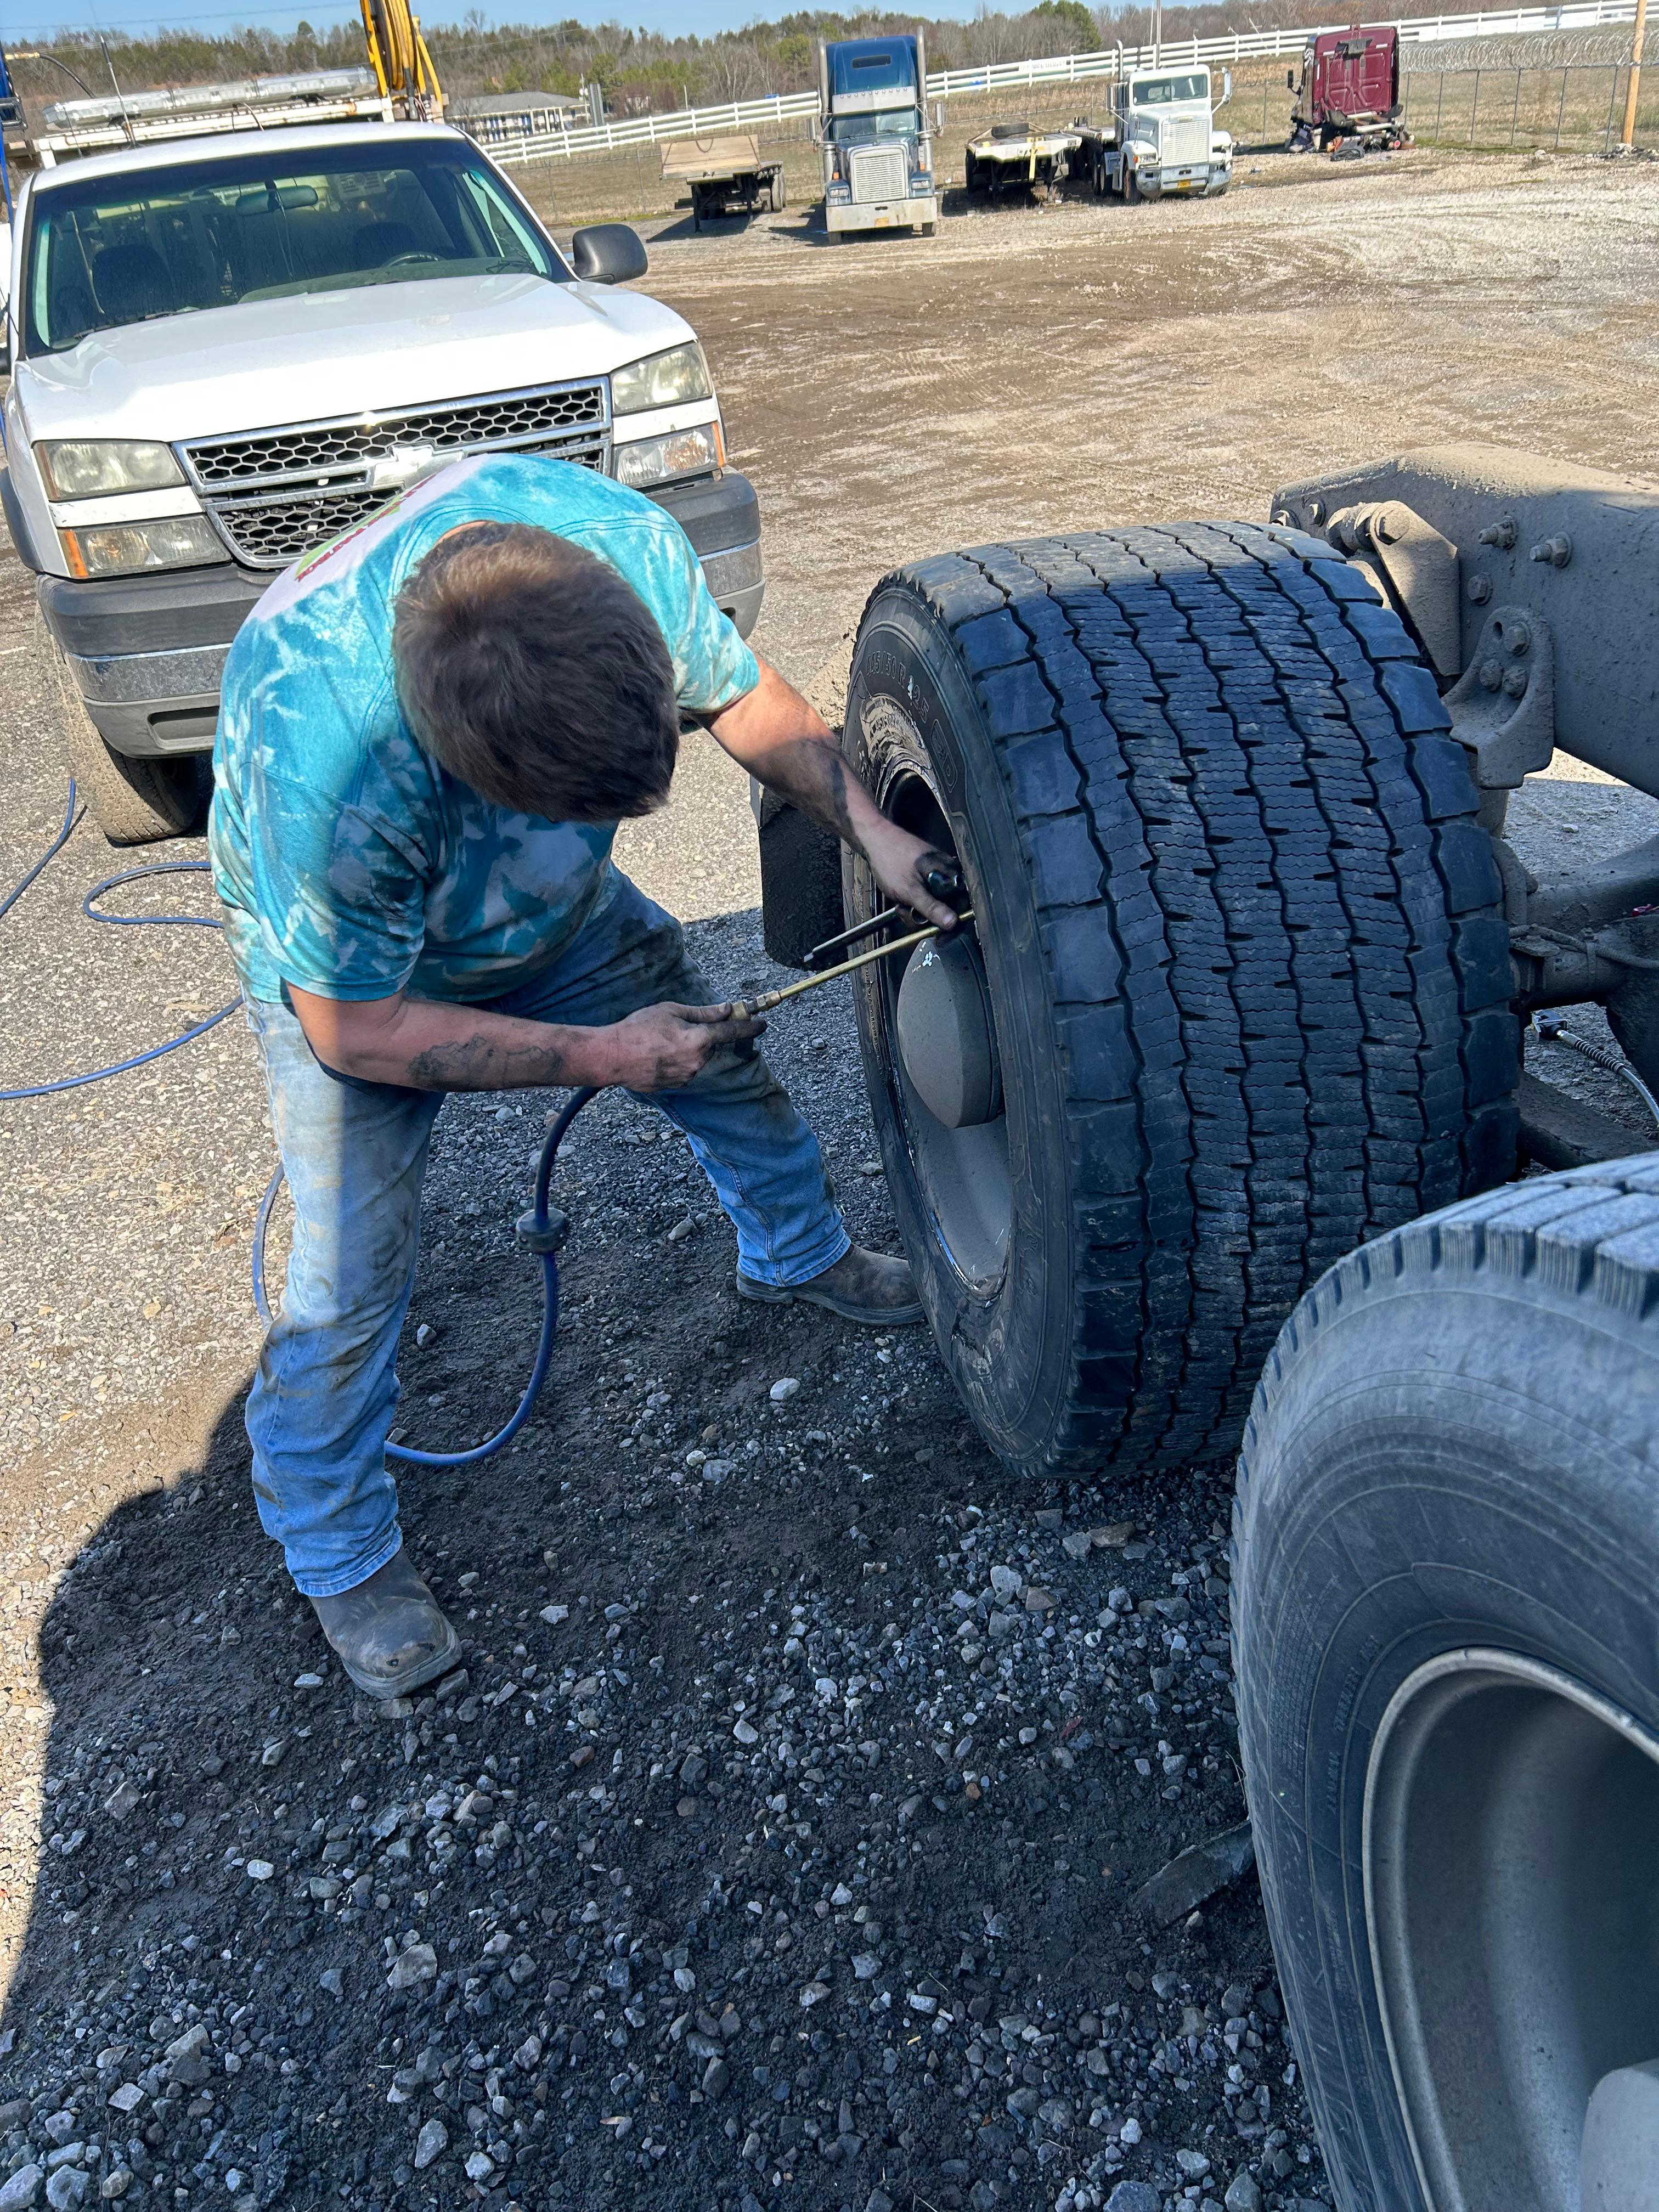 Whether it's a patch, plug, or replacement, we specialize in flat tire services to address unexpected flats efficiently.